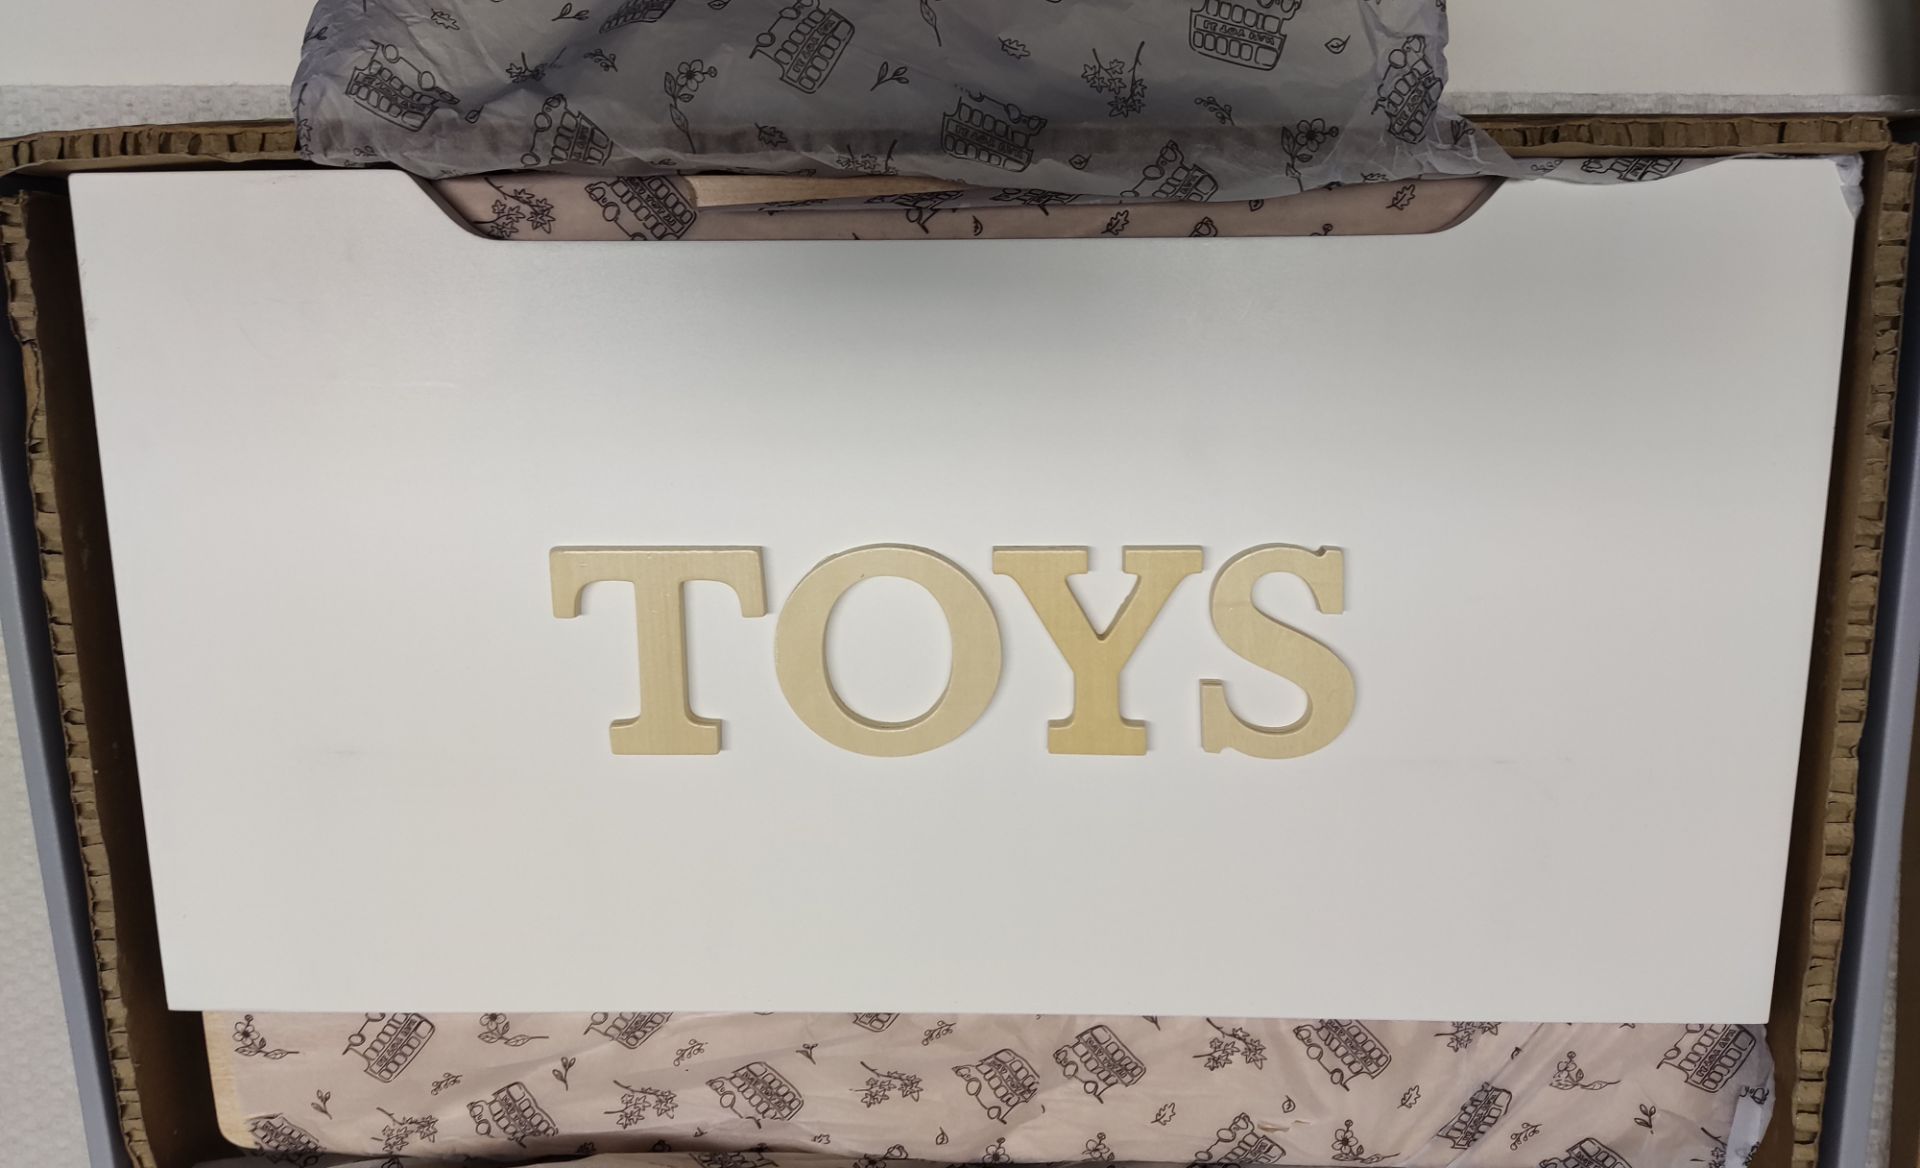 1 x LE TOY VAN Hand-Crafted Wooden Toy Storage Box - Boxed - HTYS176 - Location: Altrincham WA14 - Image 8 of 11